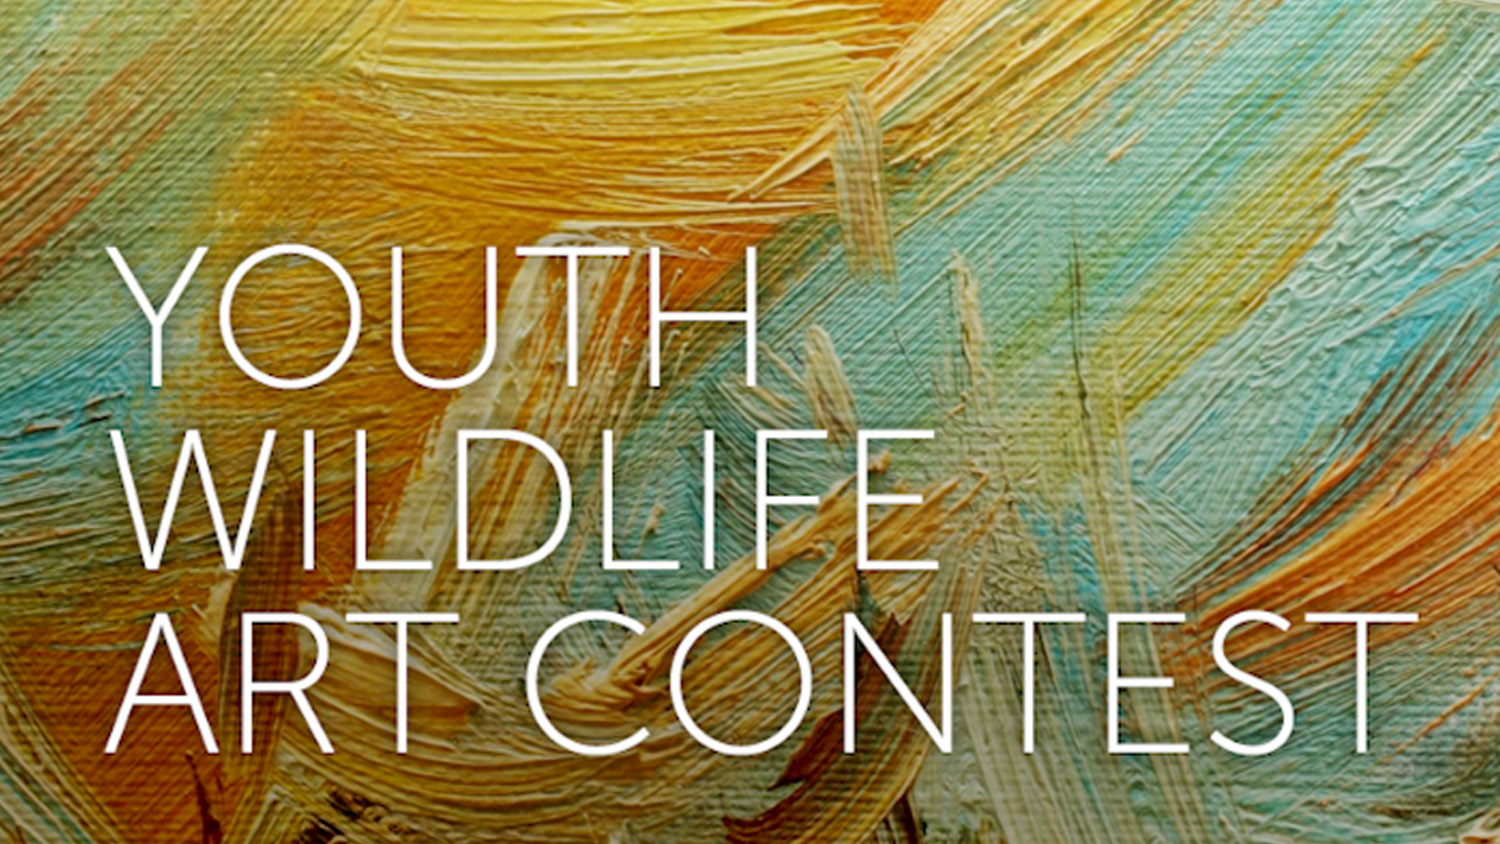 Submit Your Entry For The 2017 Youth Wildlife Art Contest!